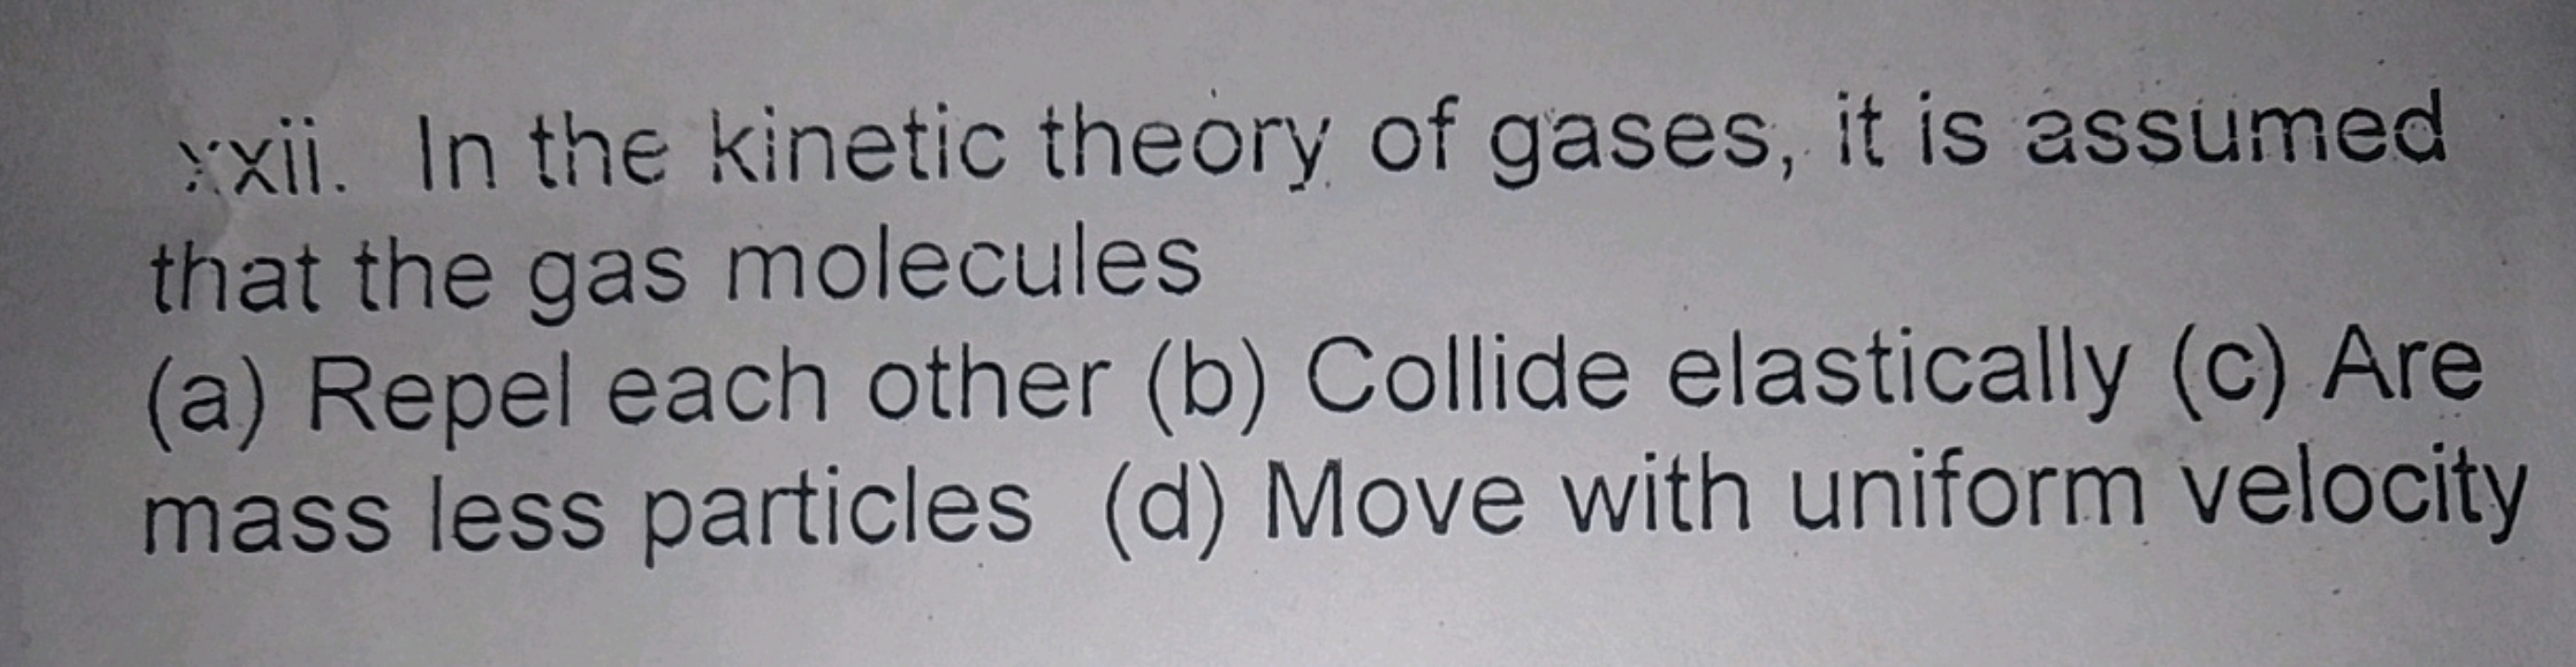 xii. In the kinetic theory of gases, it is assumed that the gas molecu